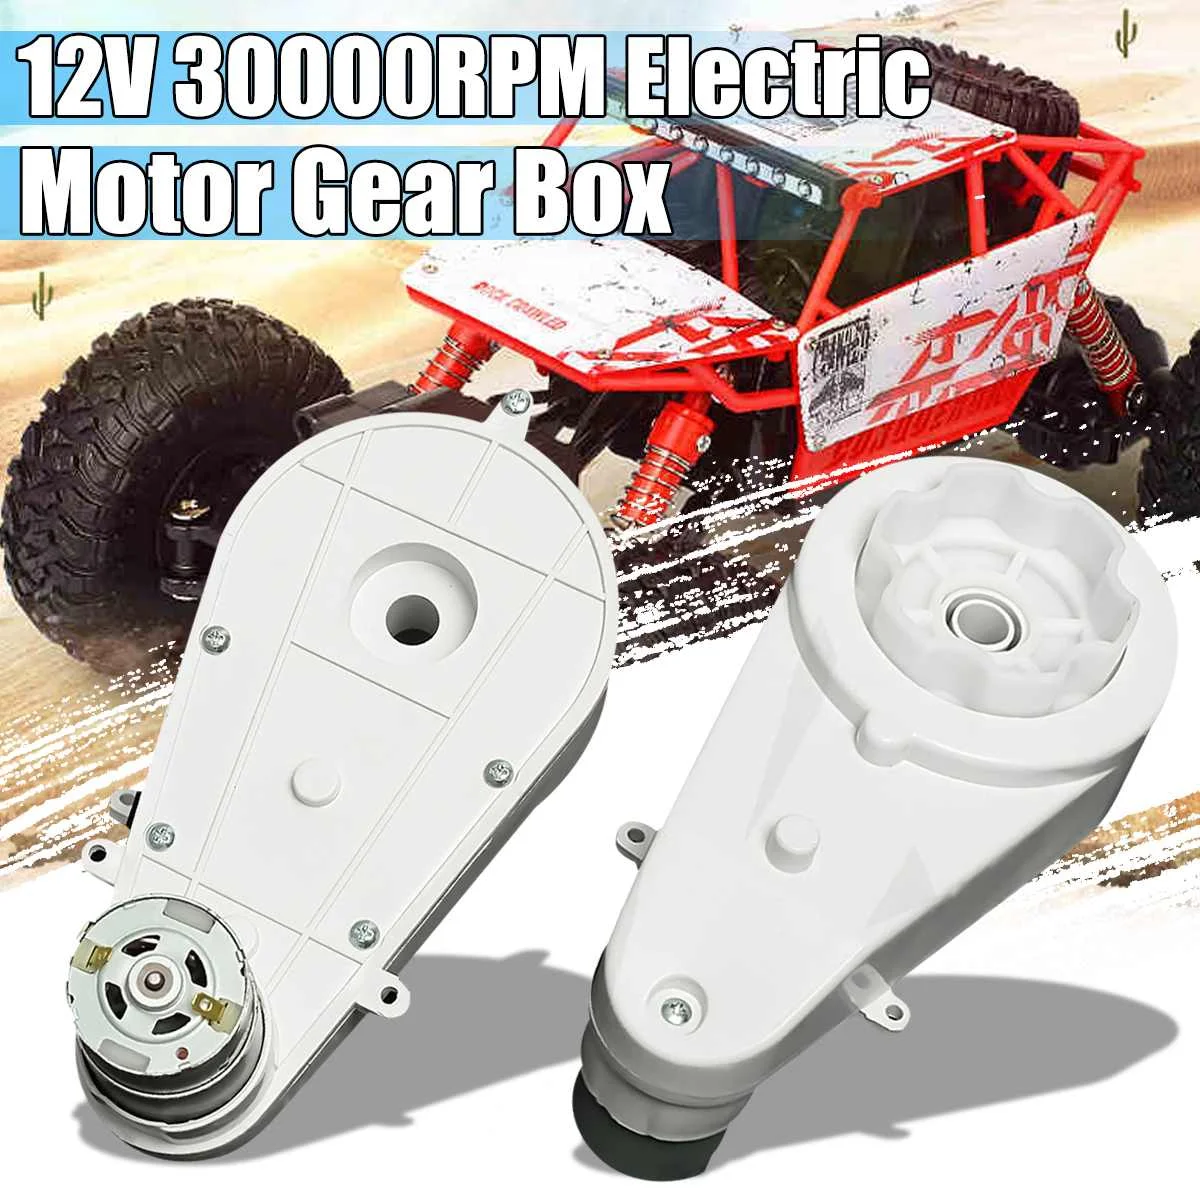 2PCS 12V 30000RPM Electric Motor Gear Box For Kids Bike Bicycle Ride On Car Toy 